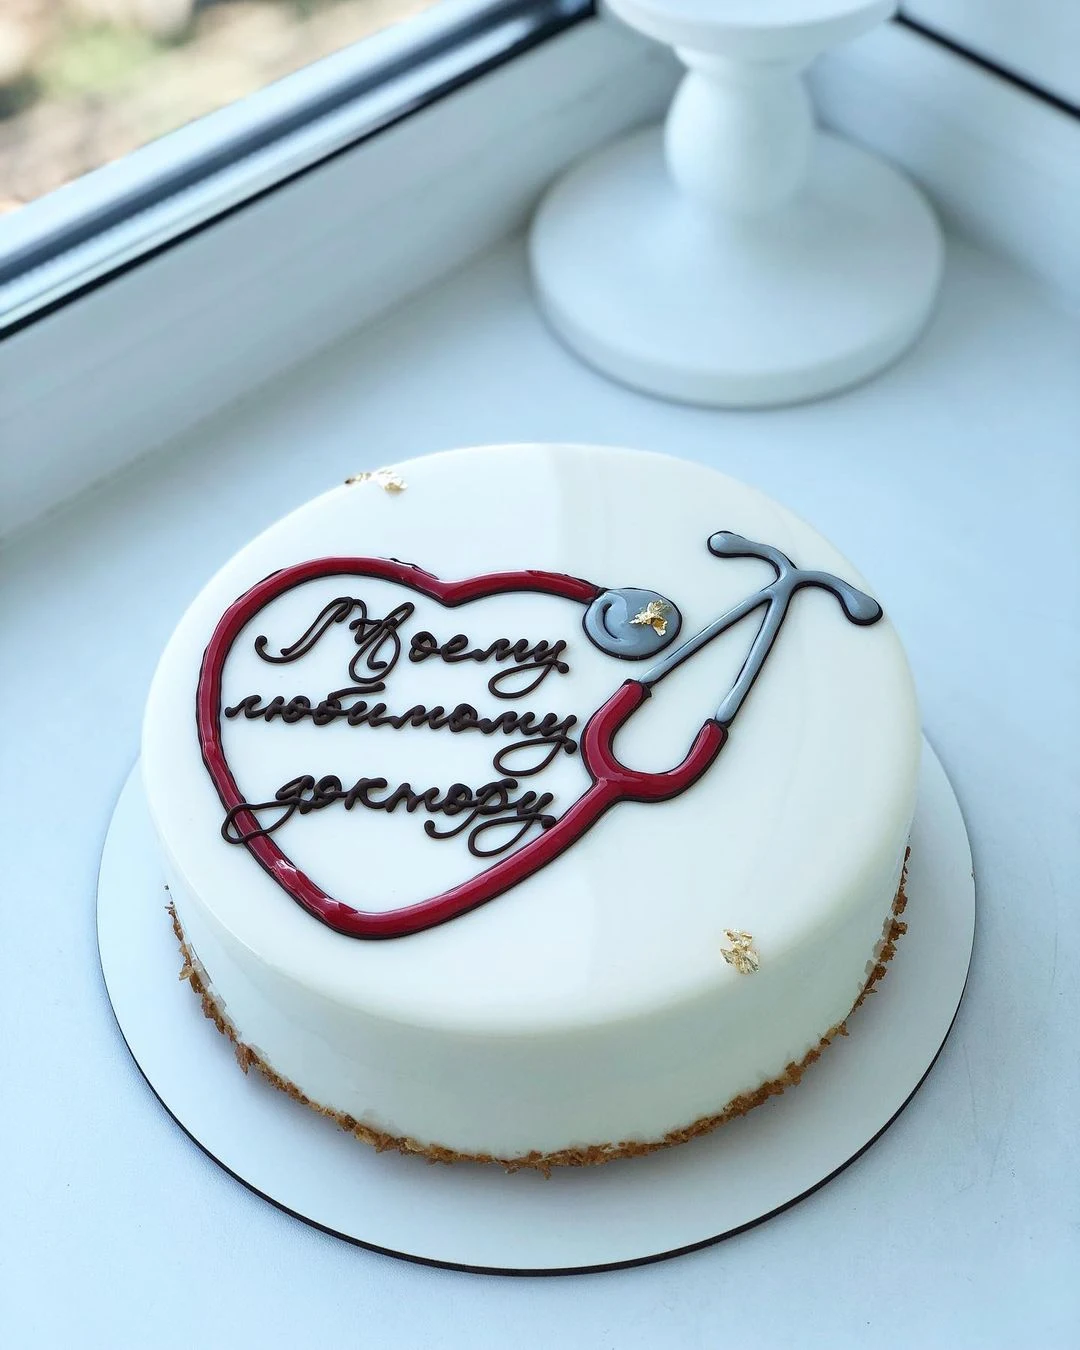 Cakes for doctors